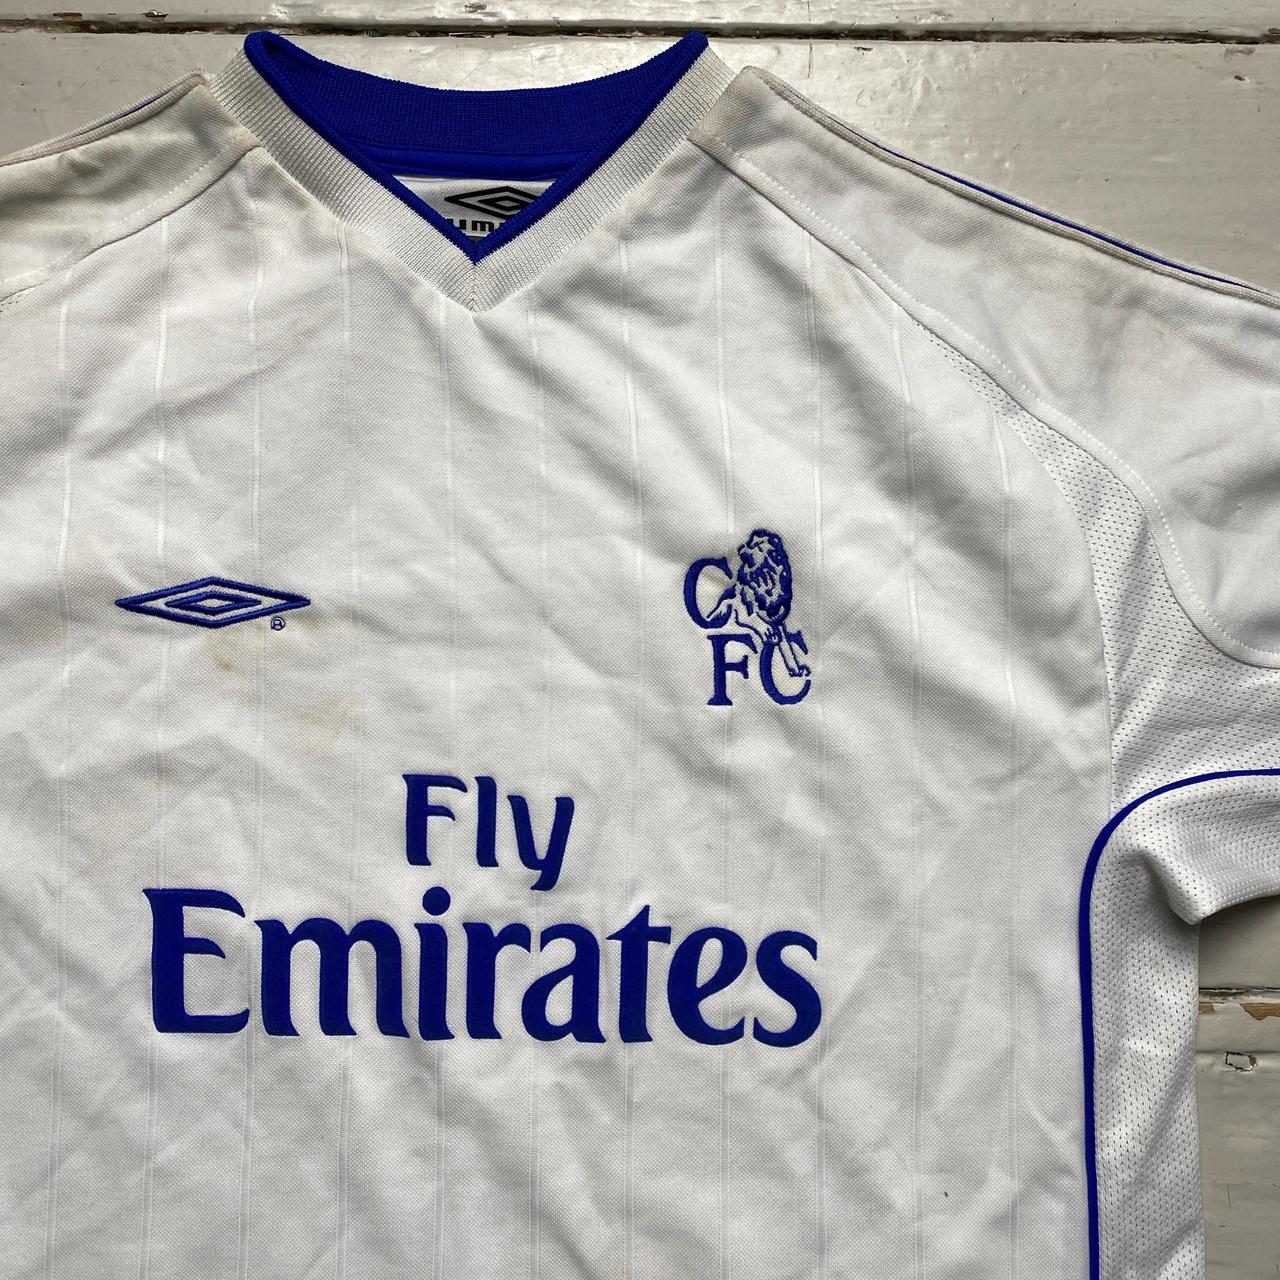 Chelsea FC Vintage Umbro Football Jersey White and Blue